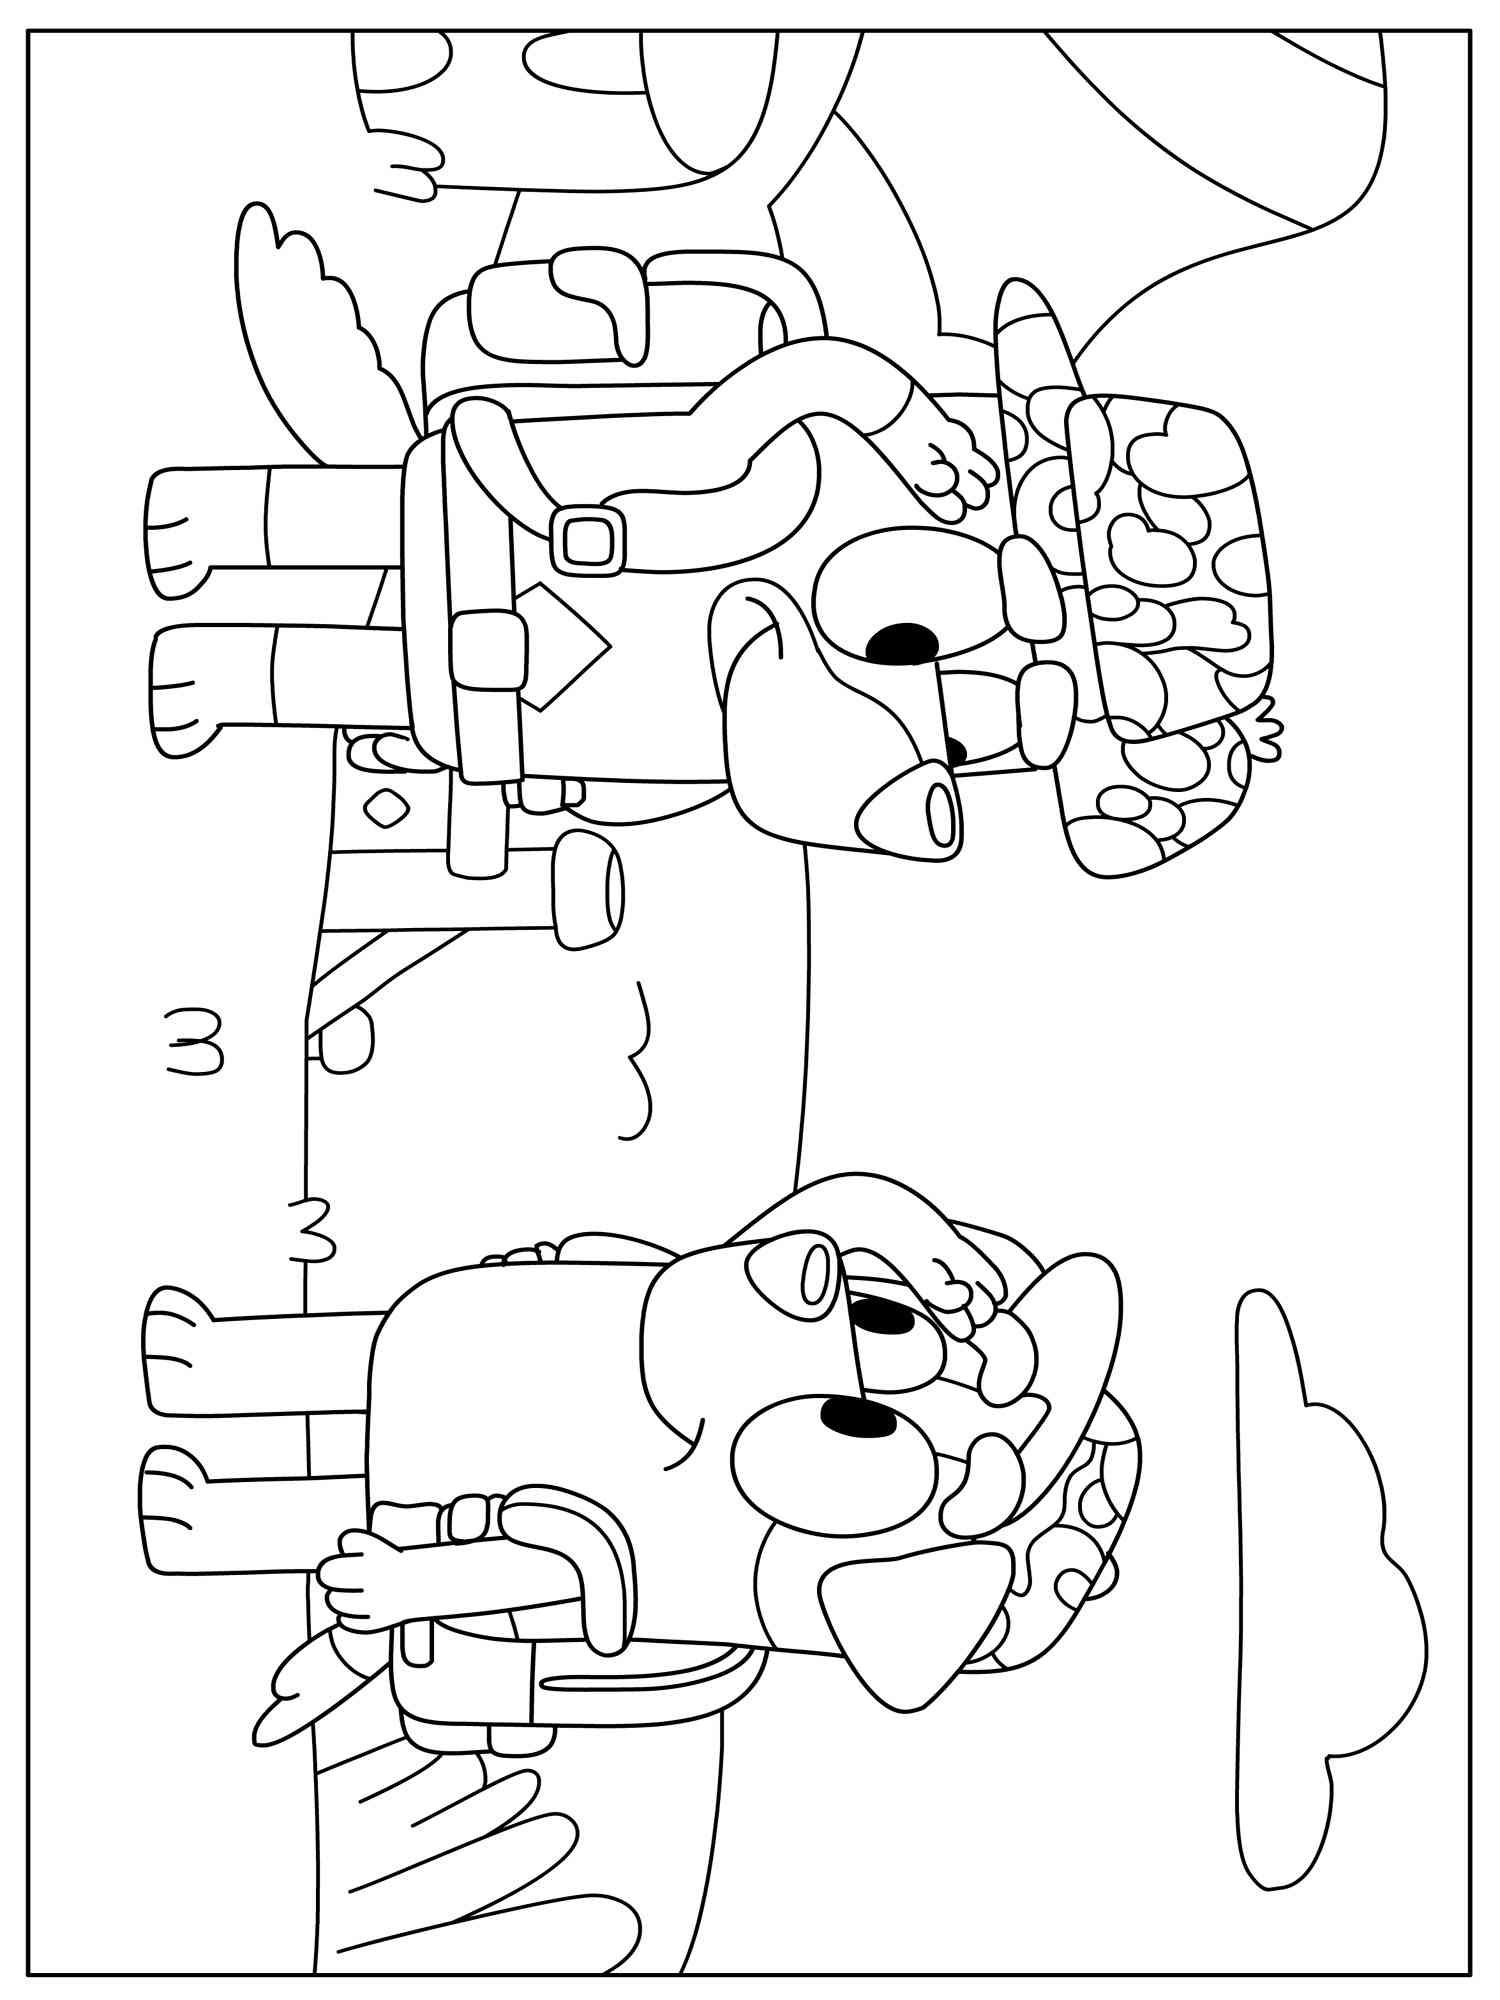 Bluey 3 coloring page